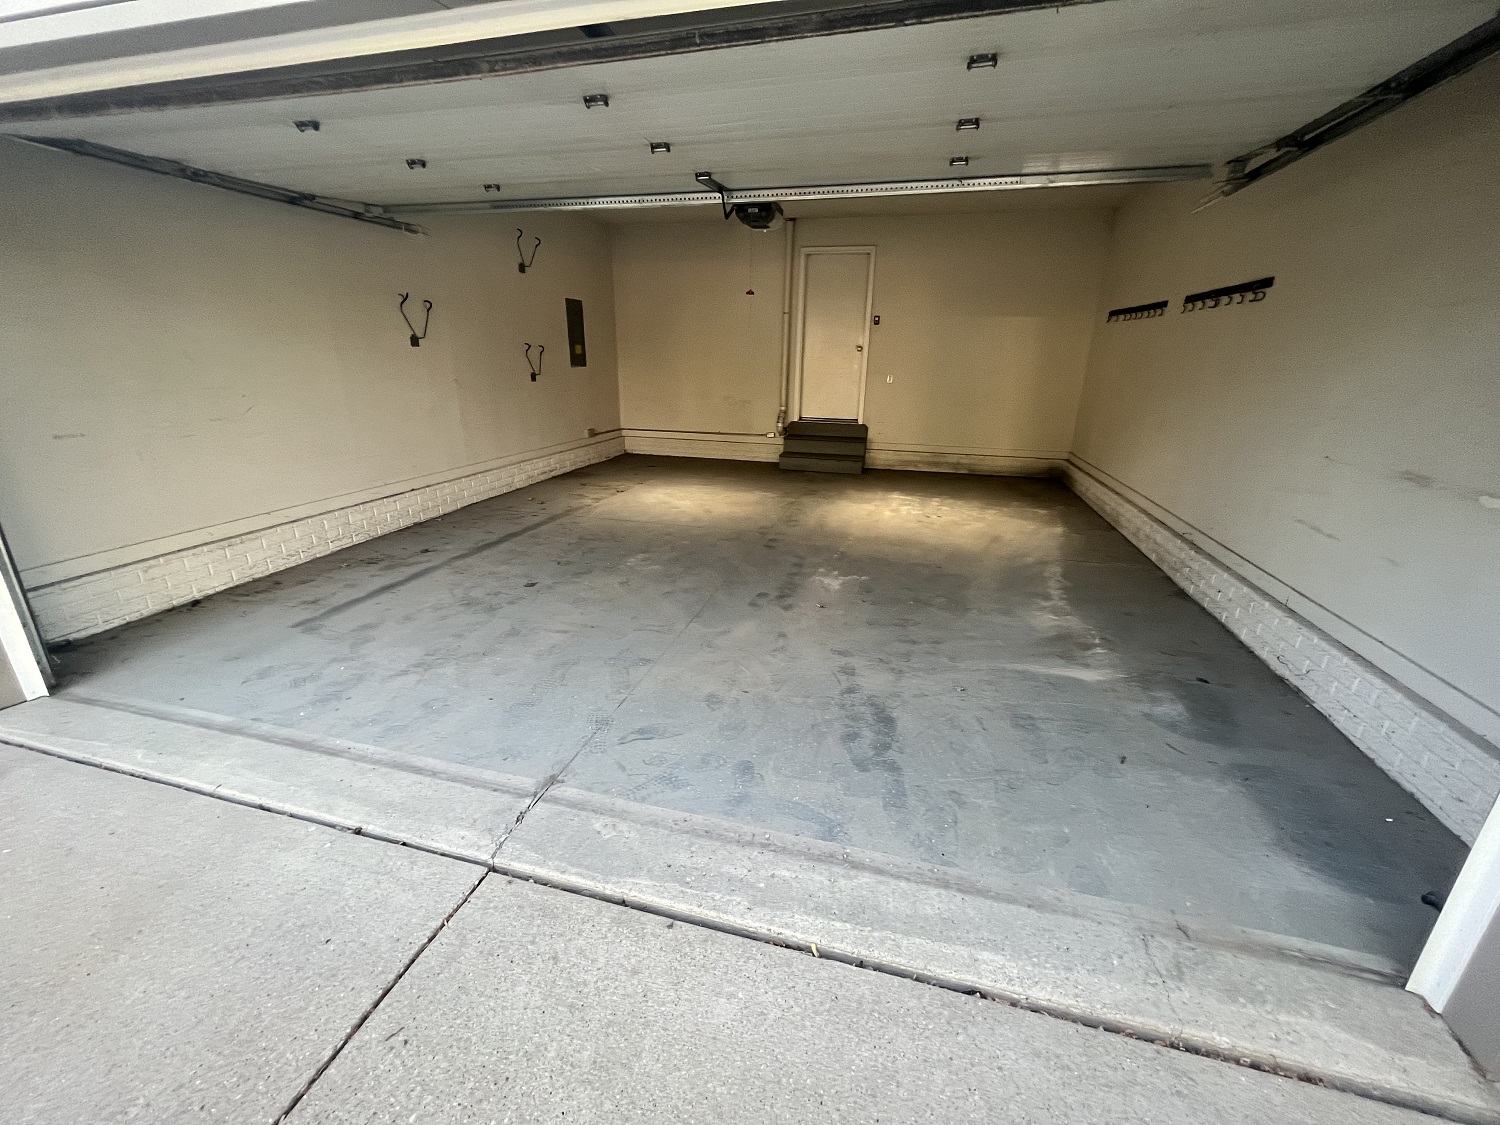 Residential garage floor coating project, before applying the polyaspartic